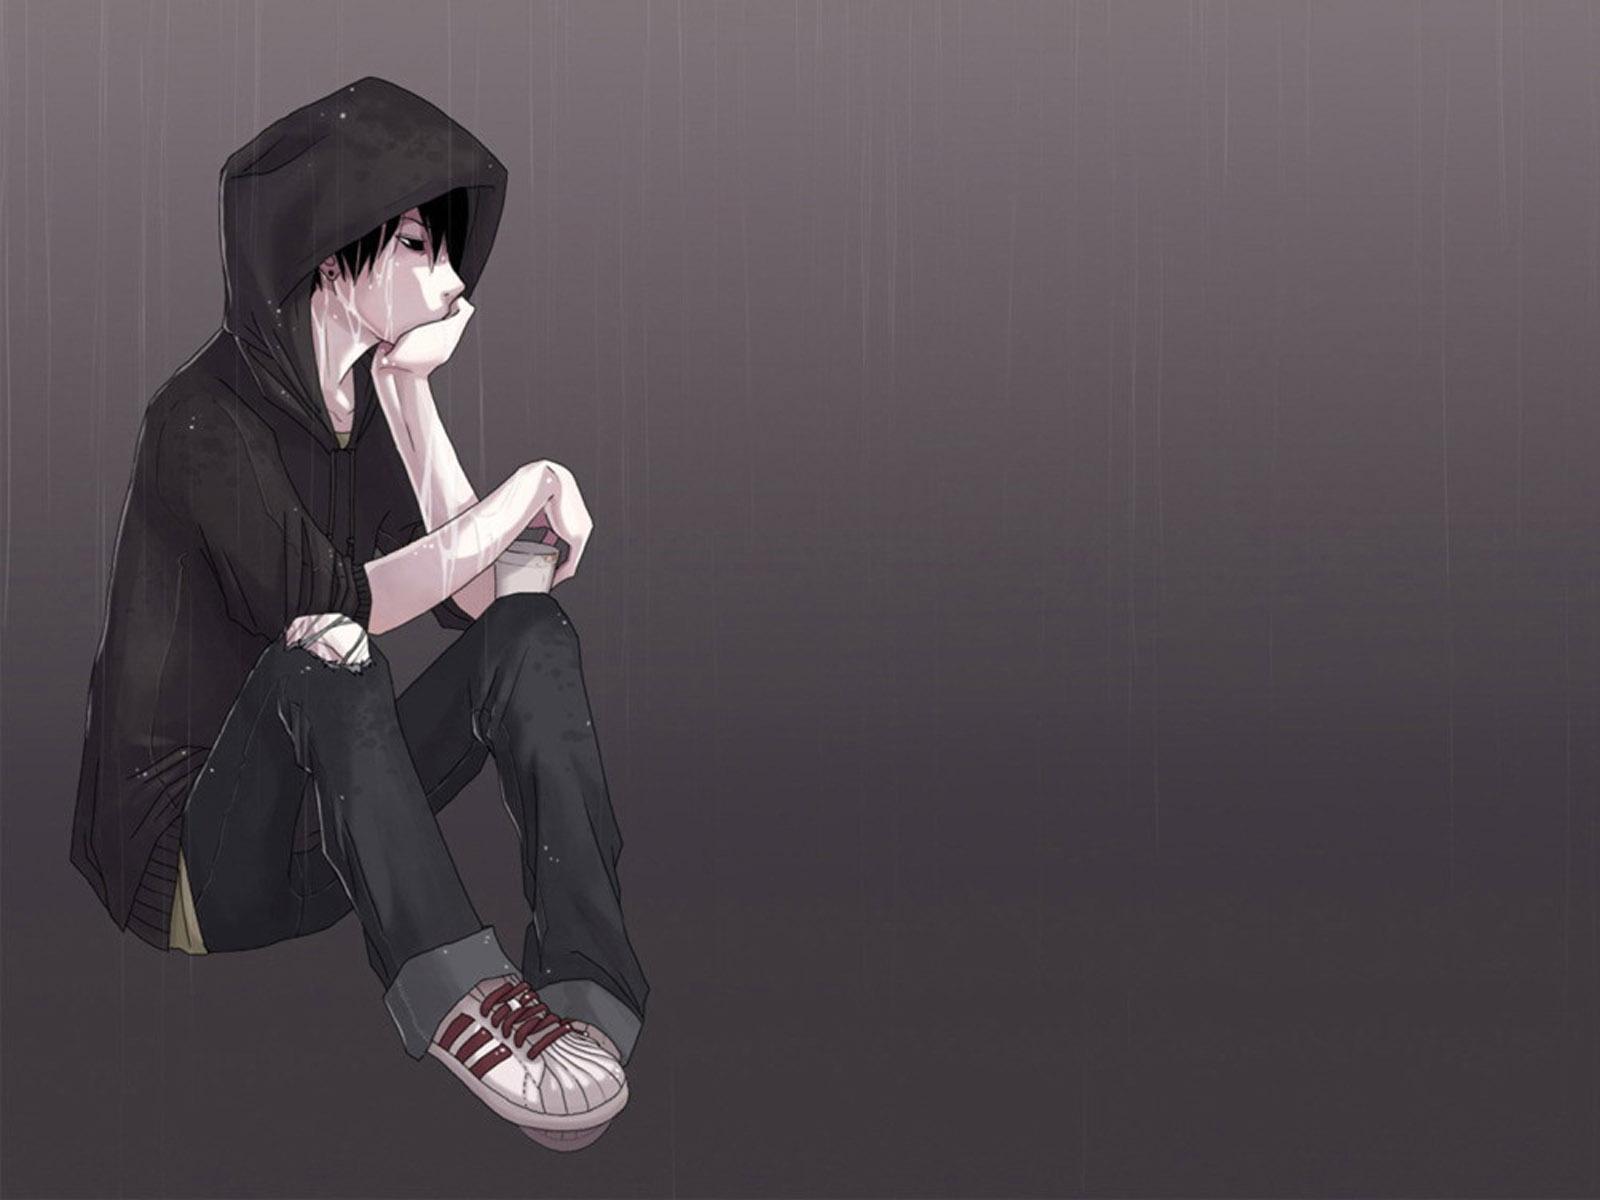 Alone Anime Boy Wallpapers Wallpaper Cave